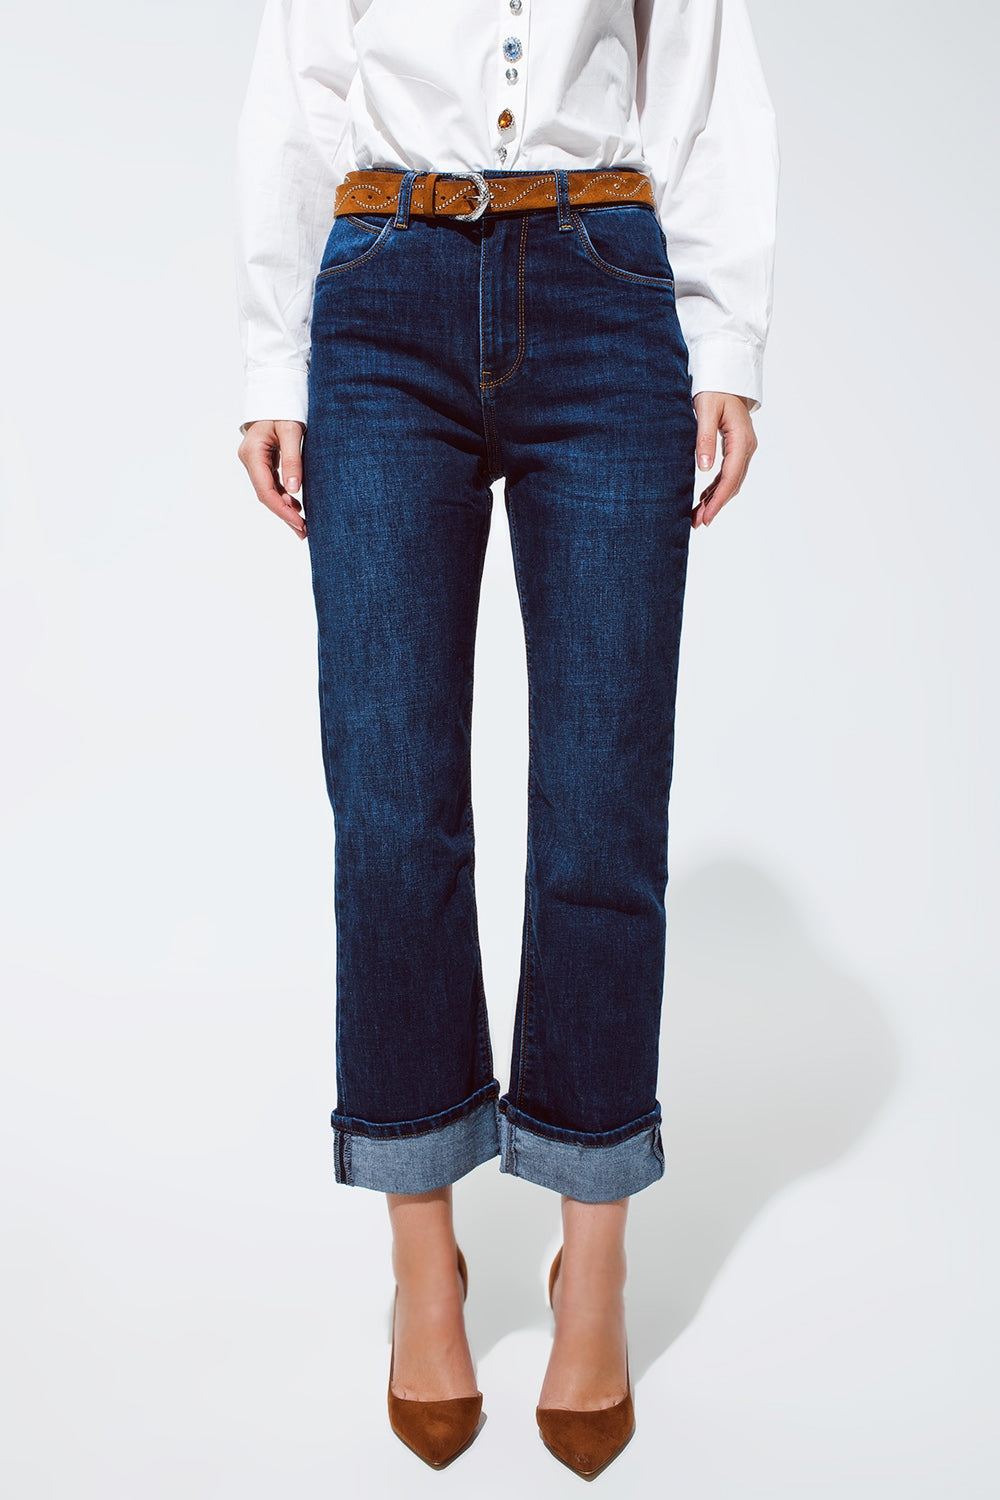 Q2 relaxed fit blue jeans with cuffed hem detail